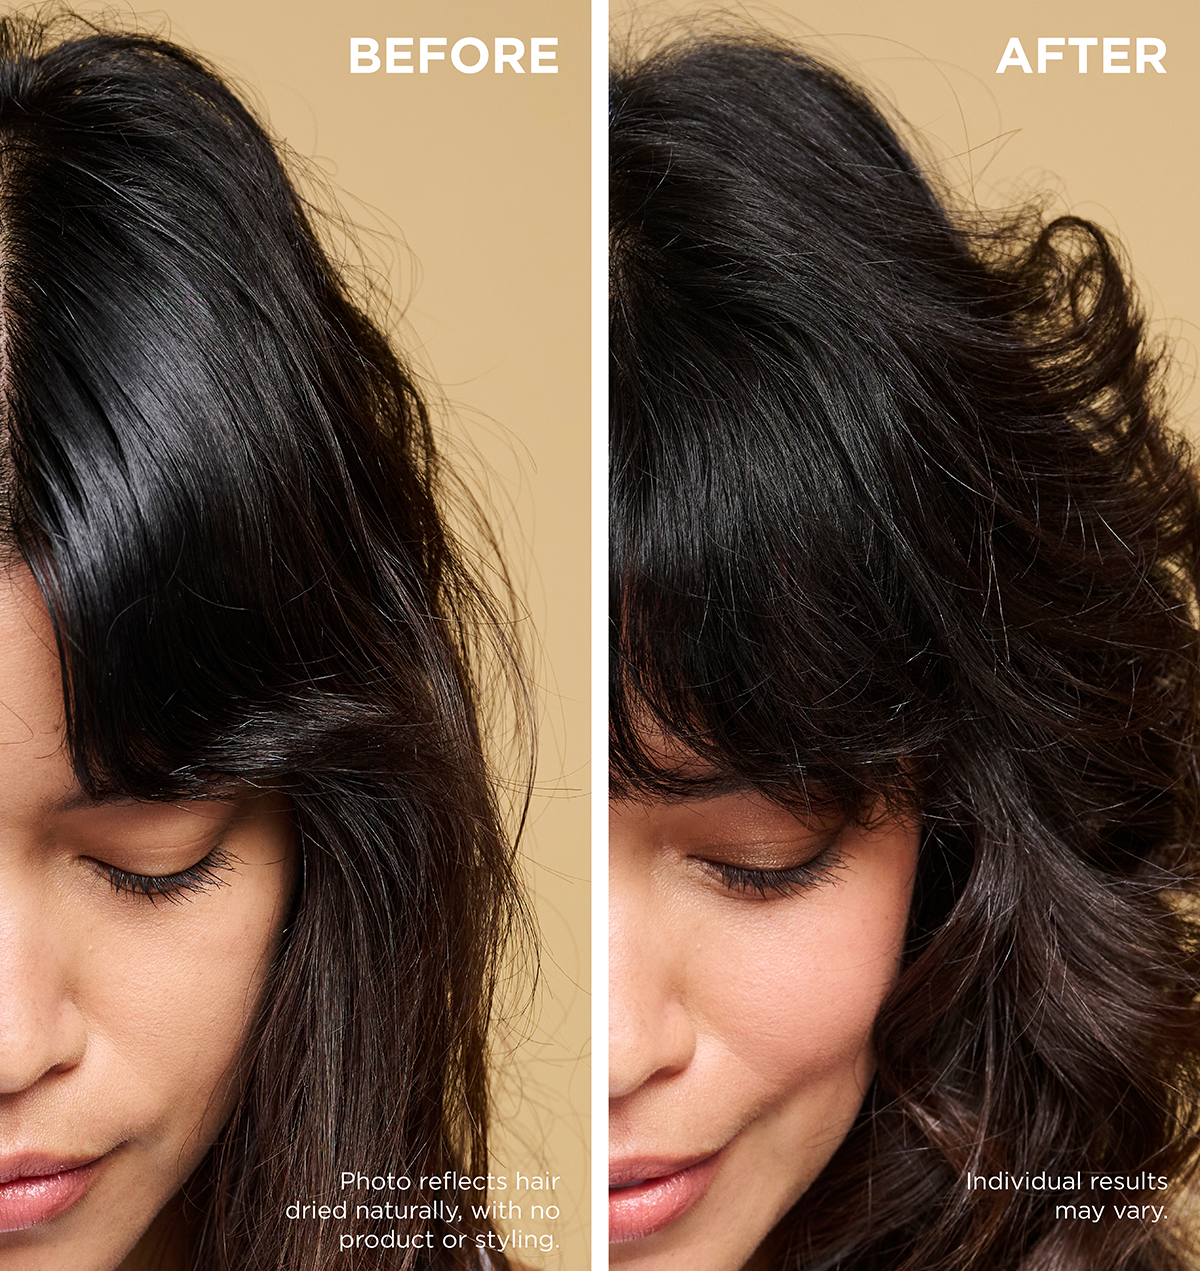 A before and after photo where the model's hair is notably fuller with more volume in the after photo.